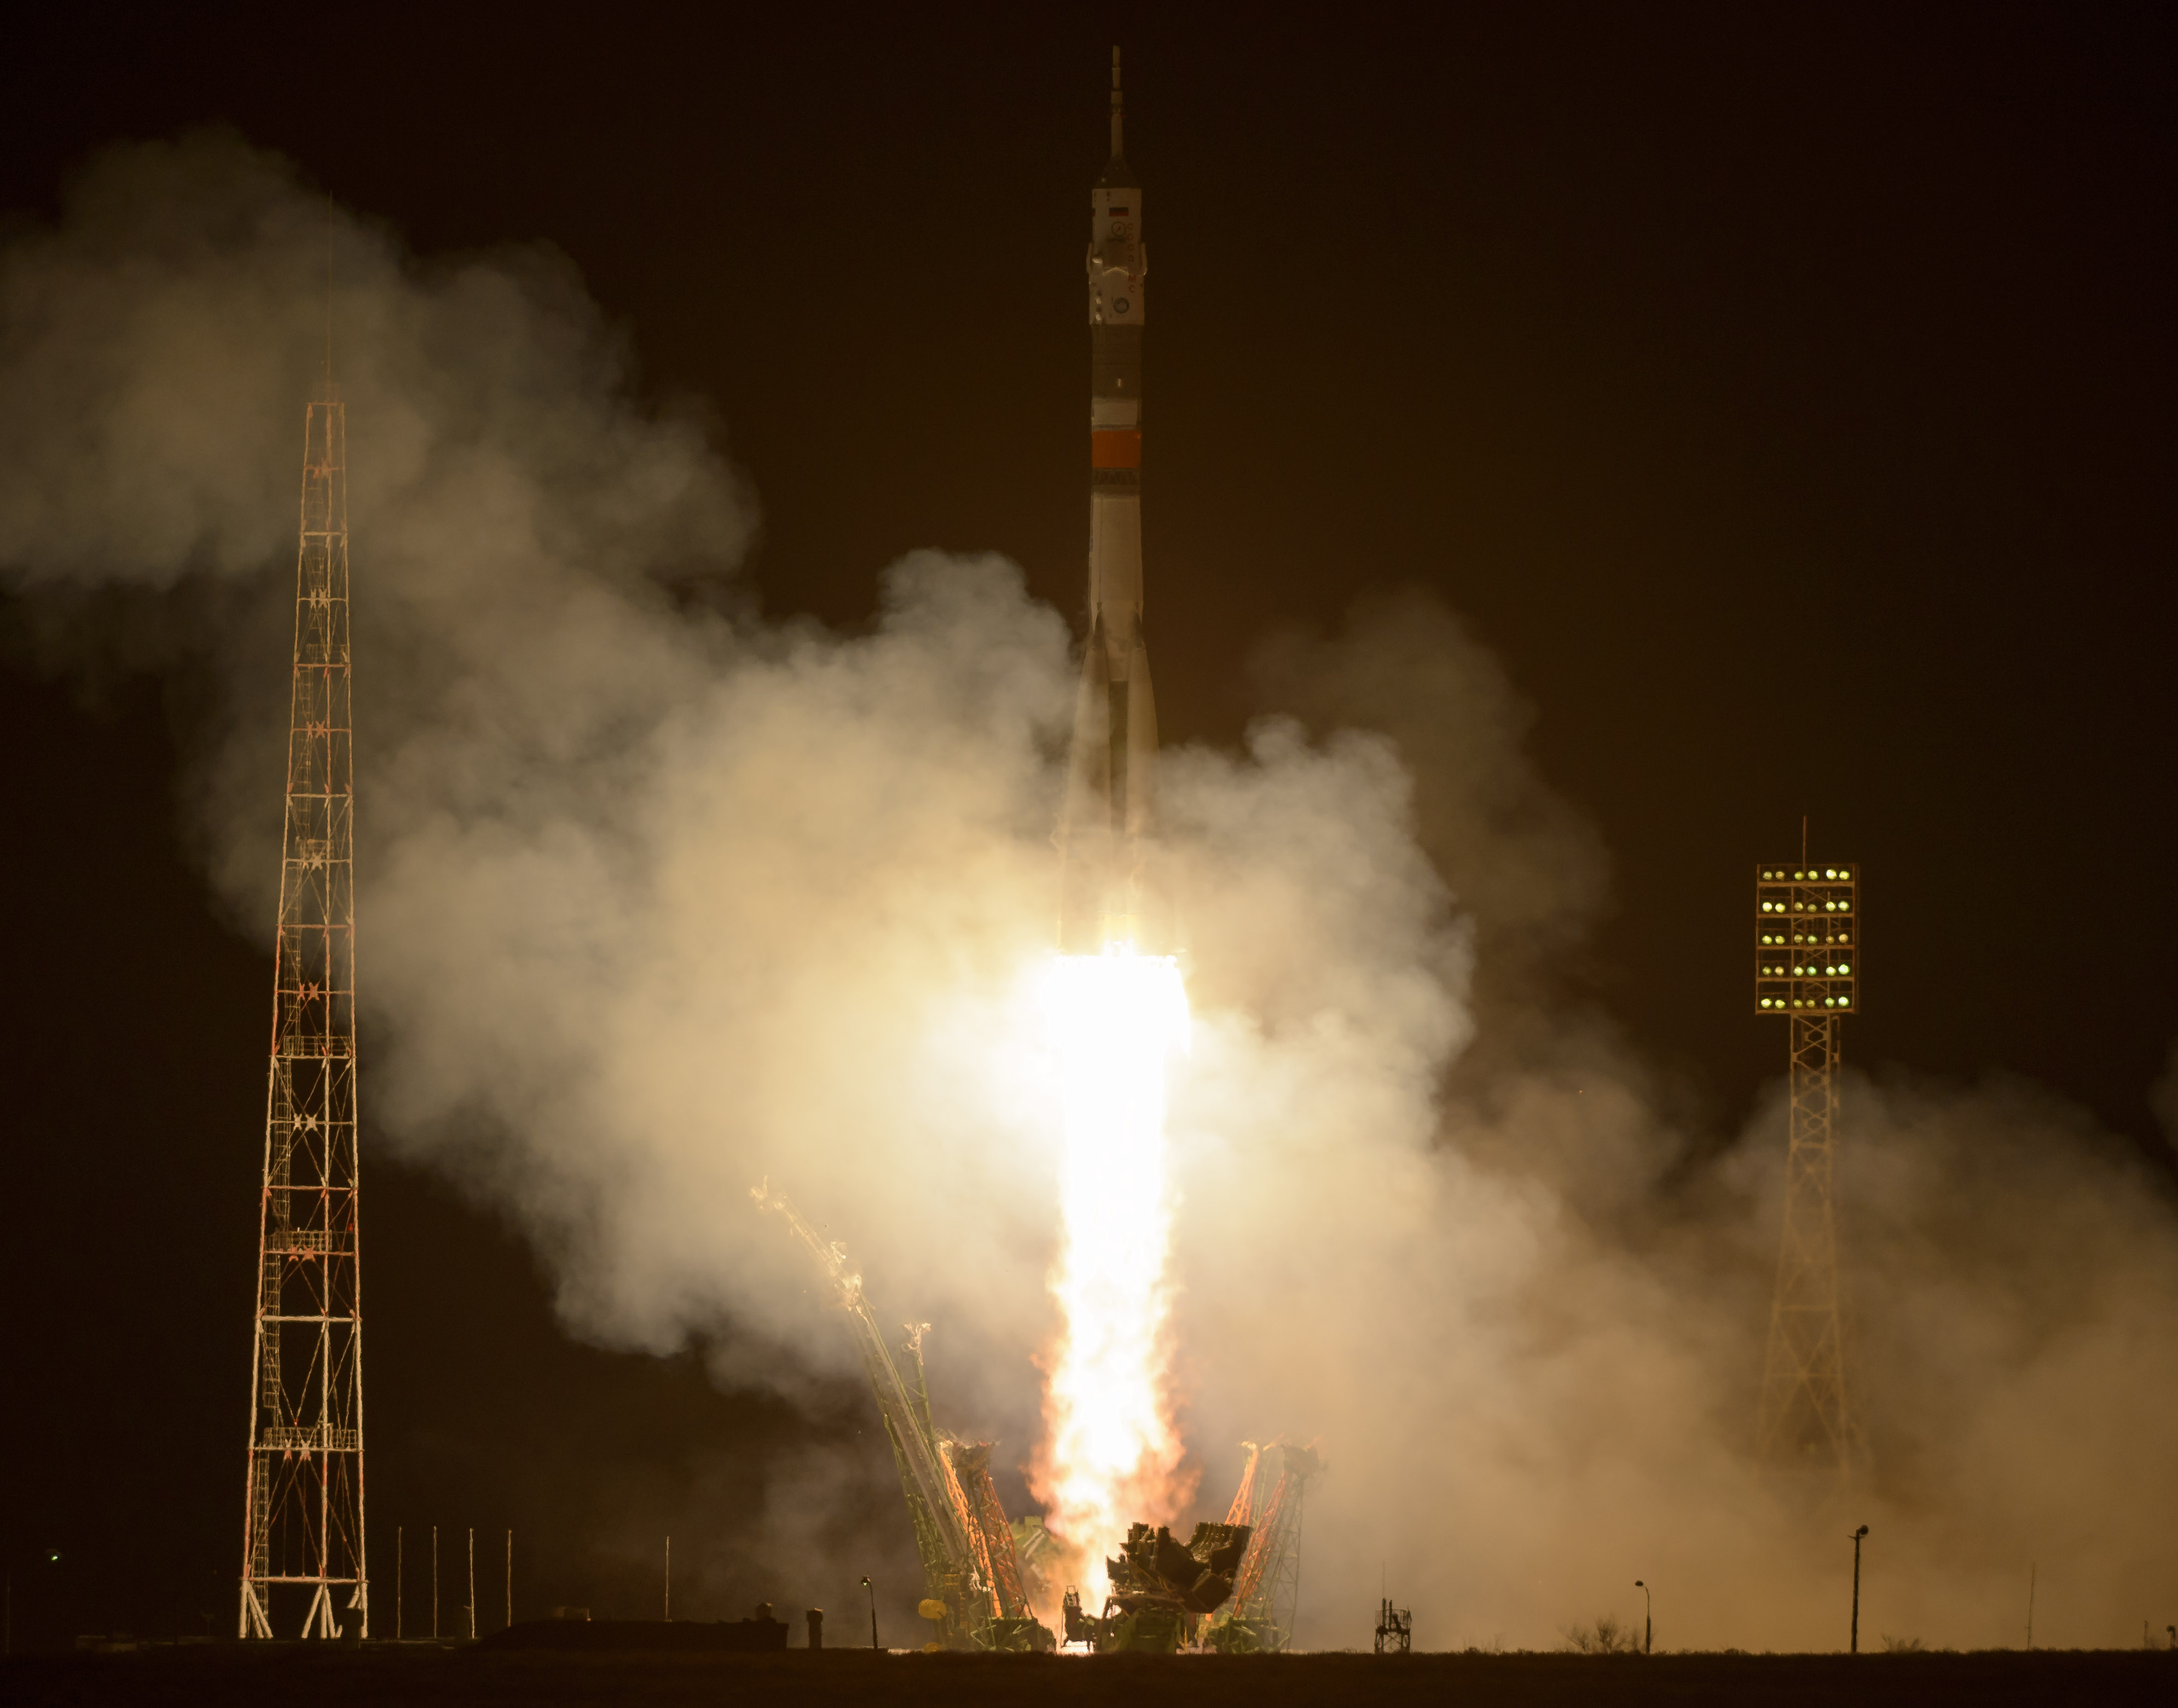 The Soyuz MS-03 spacecraft launches from the Baikonur Cosmodrome with Expedition 50 crewmembers NASA astronaut Peggy Whitson, Russian cosmonaut Oleg Novitskiy of Roscosmos, and ESA astronaut Thomas Pesquet from the Baikonur Cosmodrome in Kazakhstan, Friday, Nov. 18, 2016, (Kazakh time) (Nov 17 Eastern time). Whitson, Novitskiy, and Pesquet will spend approximately six months on the orbital complex. Photo Credit: (NASA/Bill Ingalls)